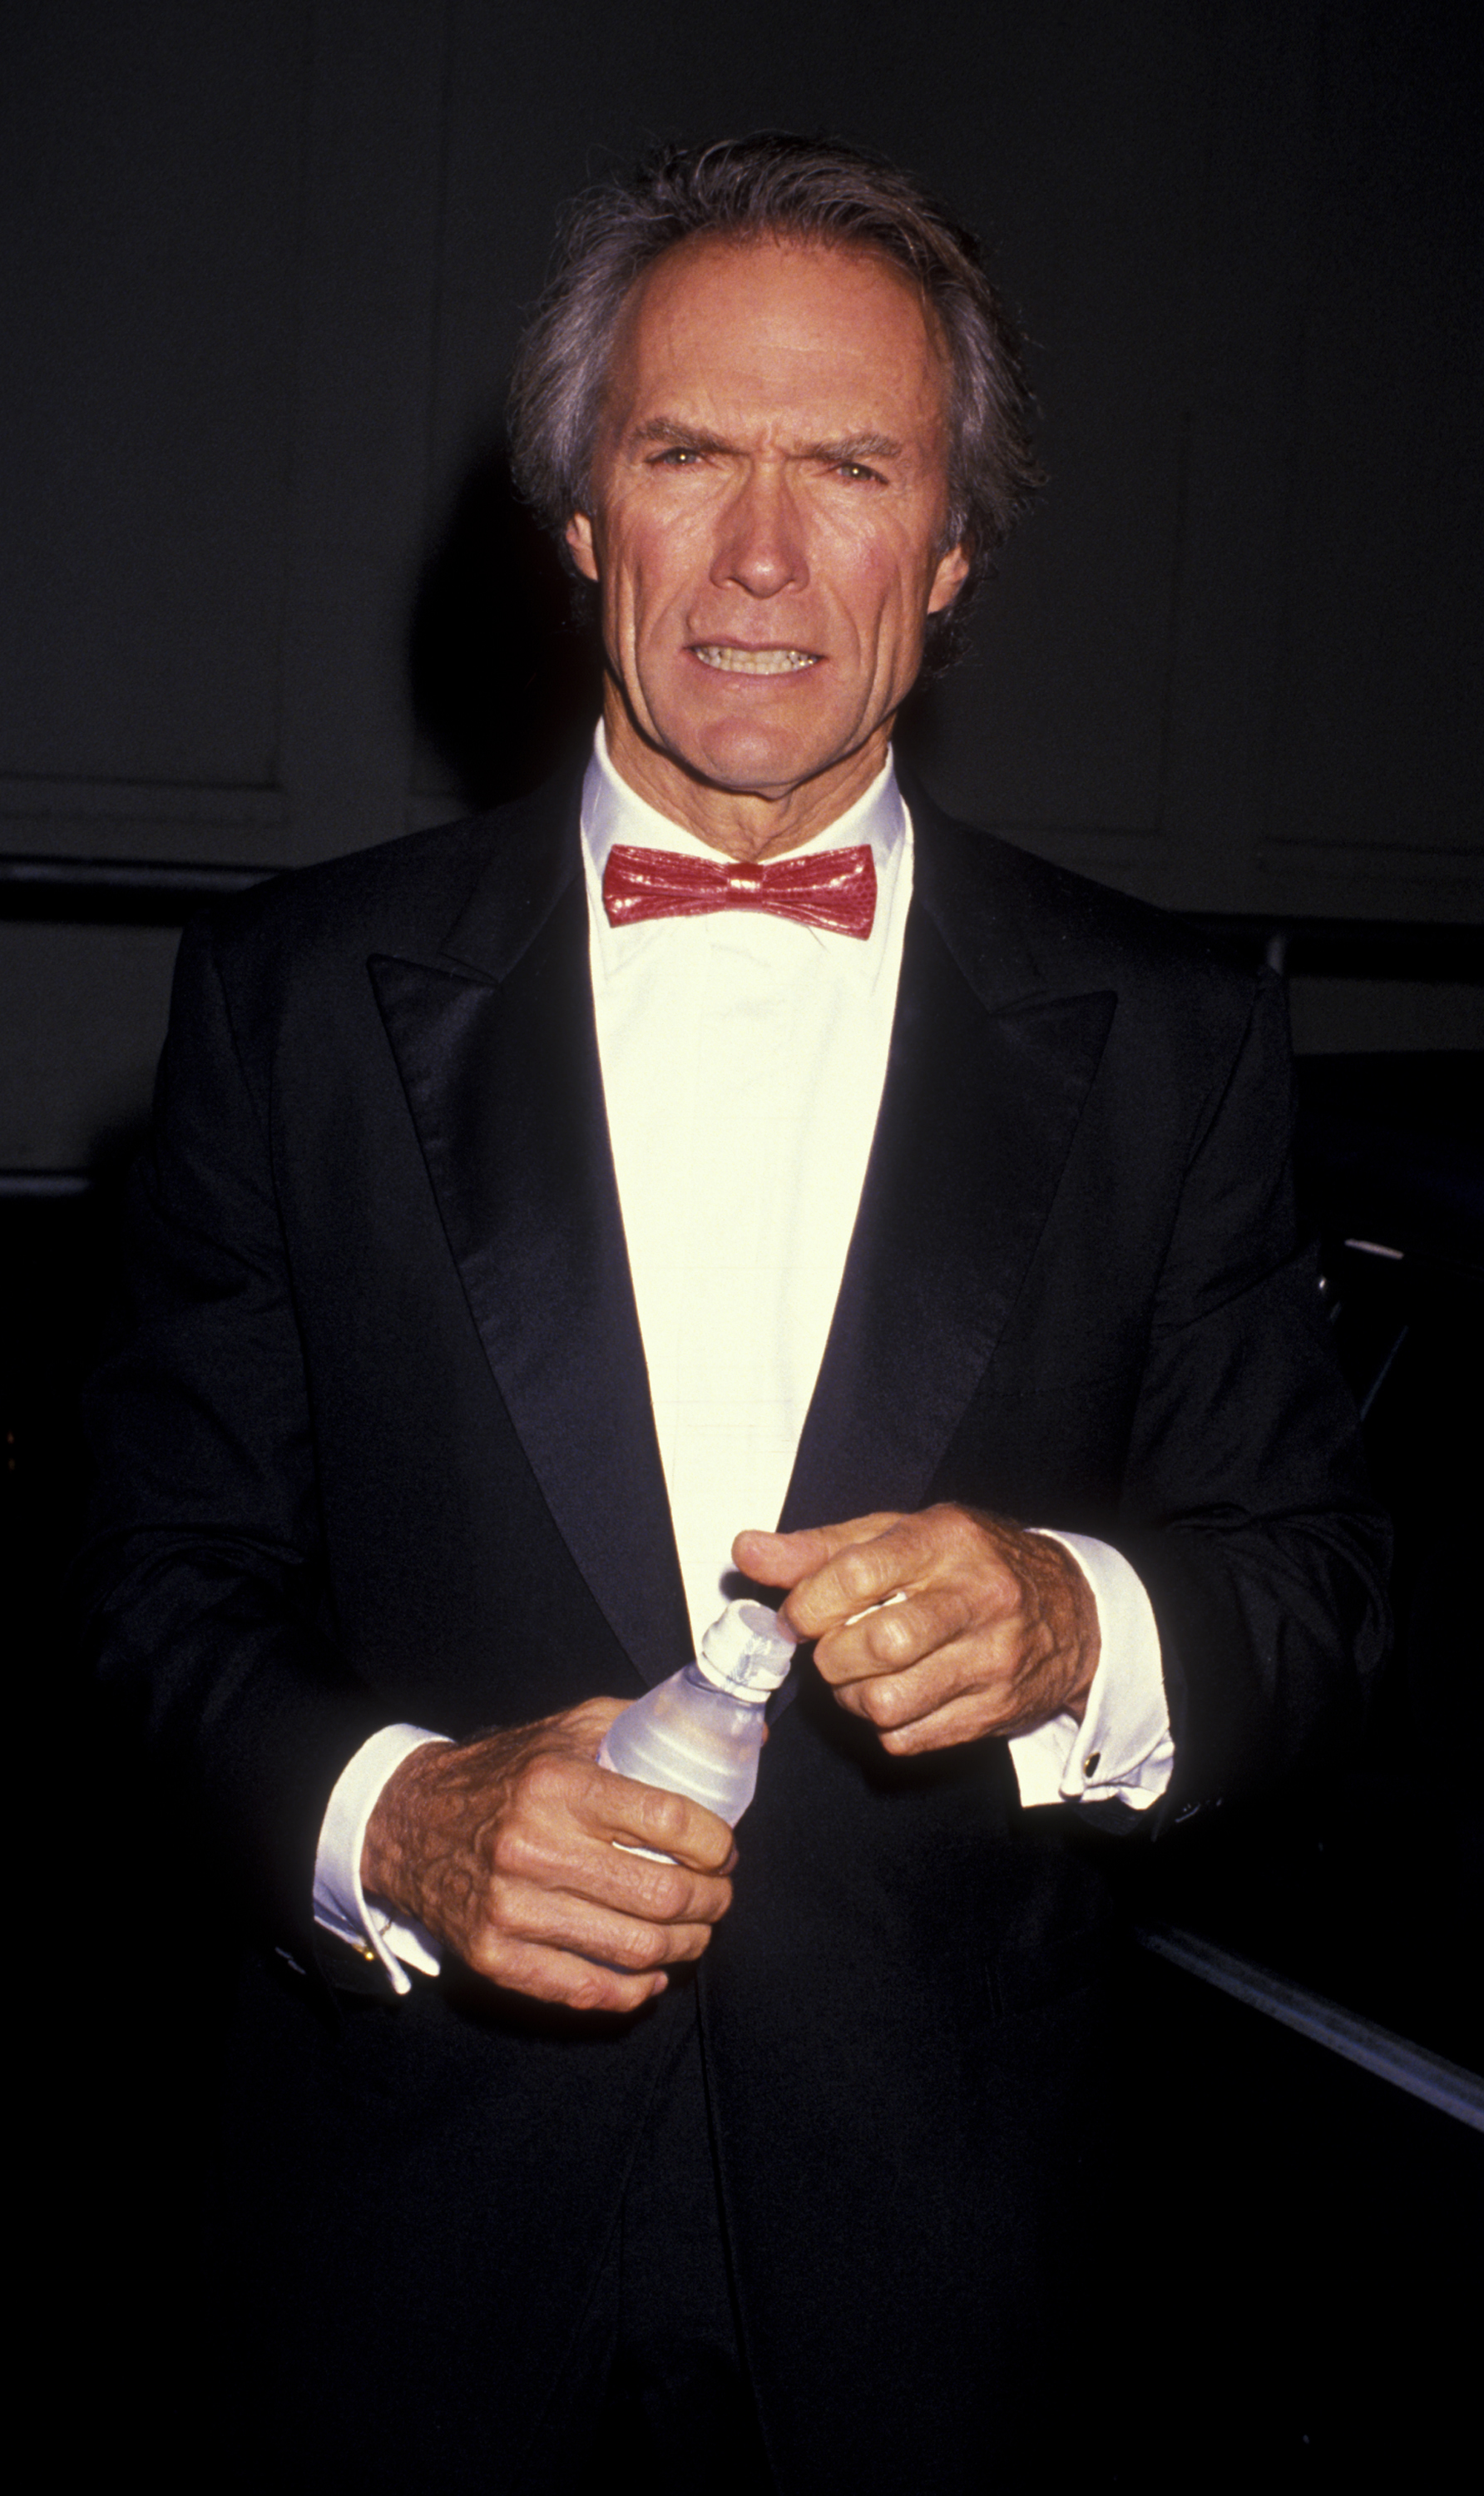 Clint Eastwood attends Gala Honoring Sammy Davis Jr. at the Shrine Auditorium in Los Angeles, California, on November 13, 1989. | Source: Getty Images